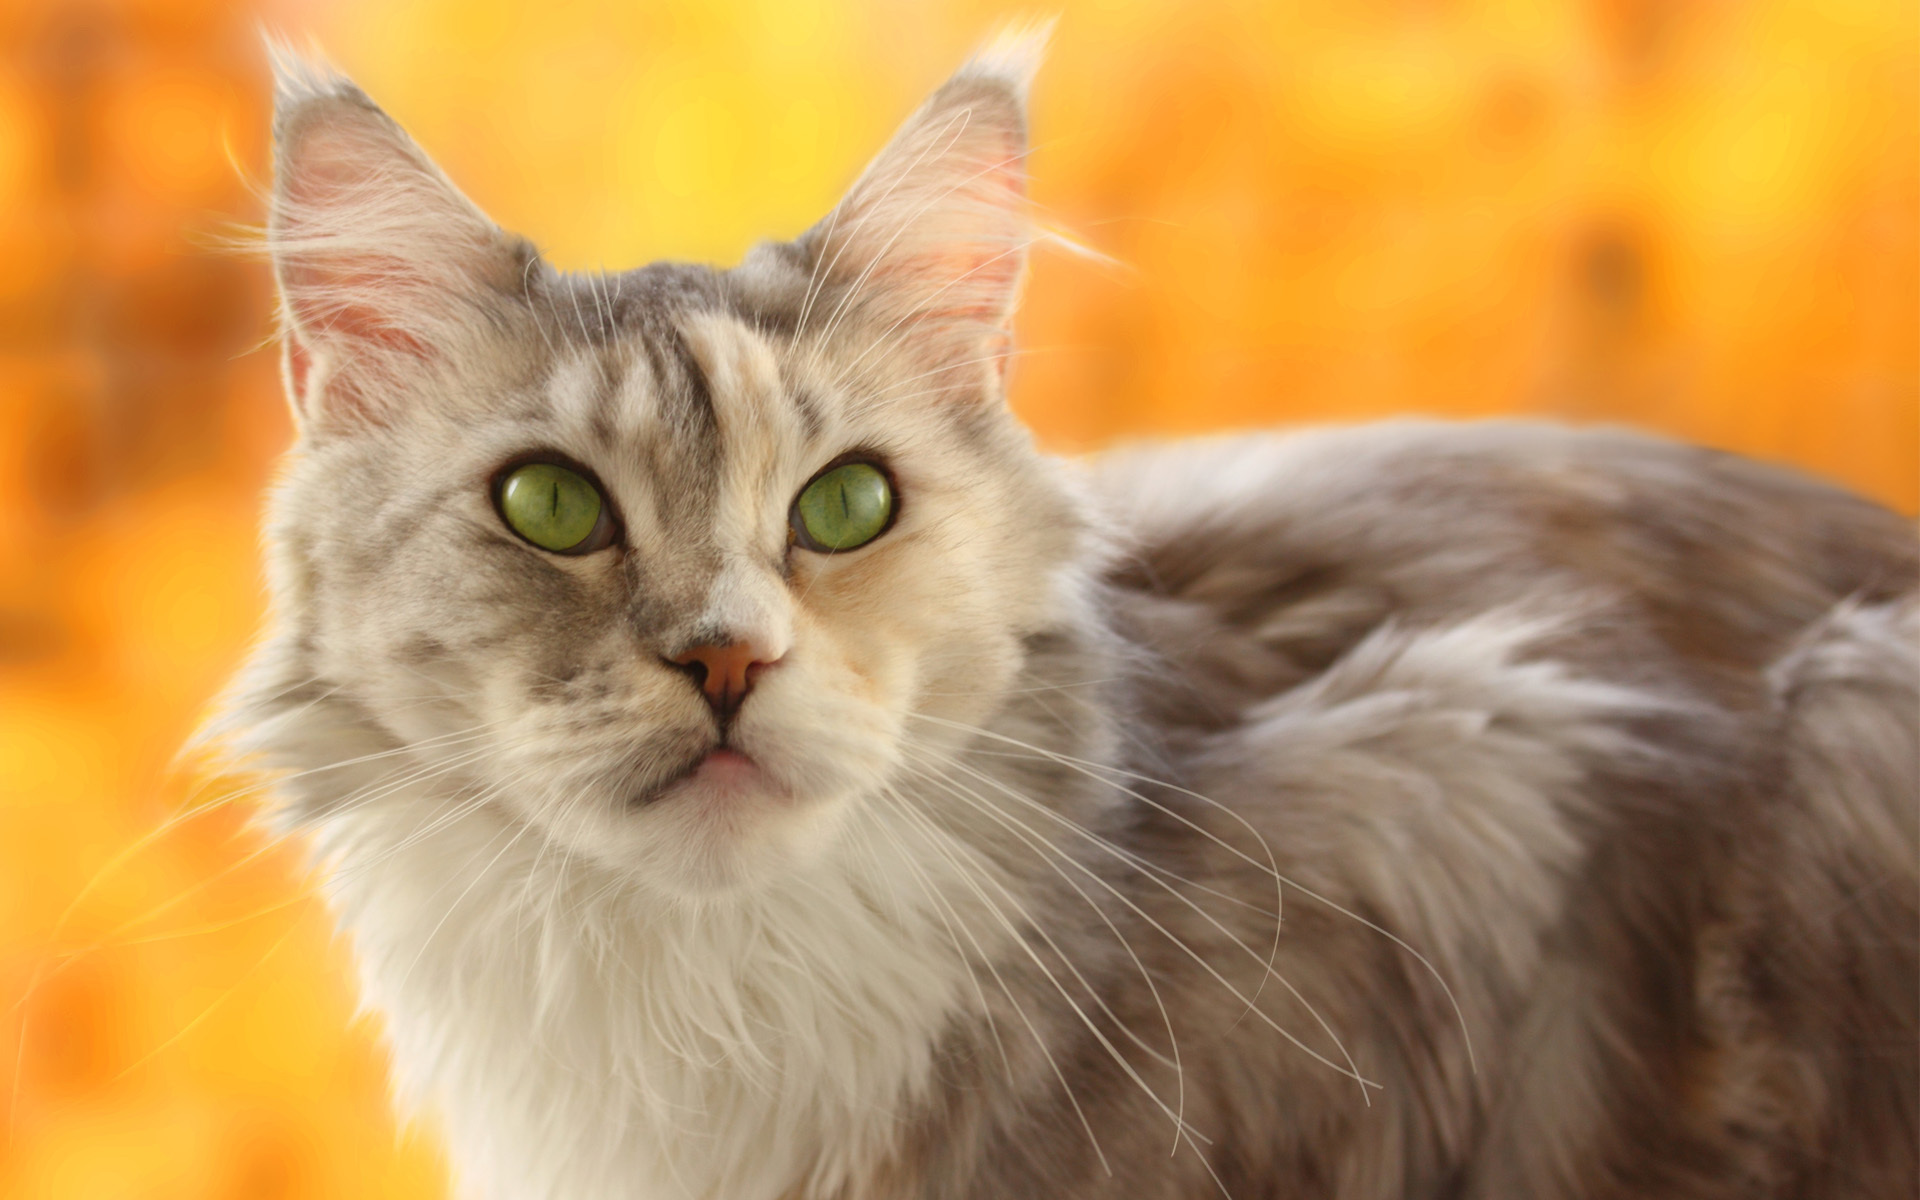 Resolution Wallpaper Of Cat Photo Muzzle The Yellow Background